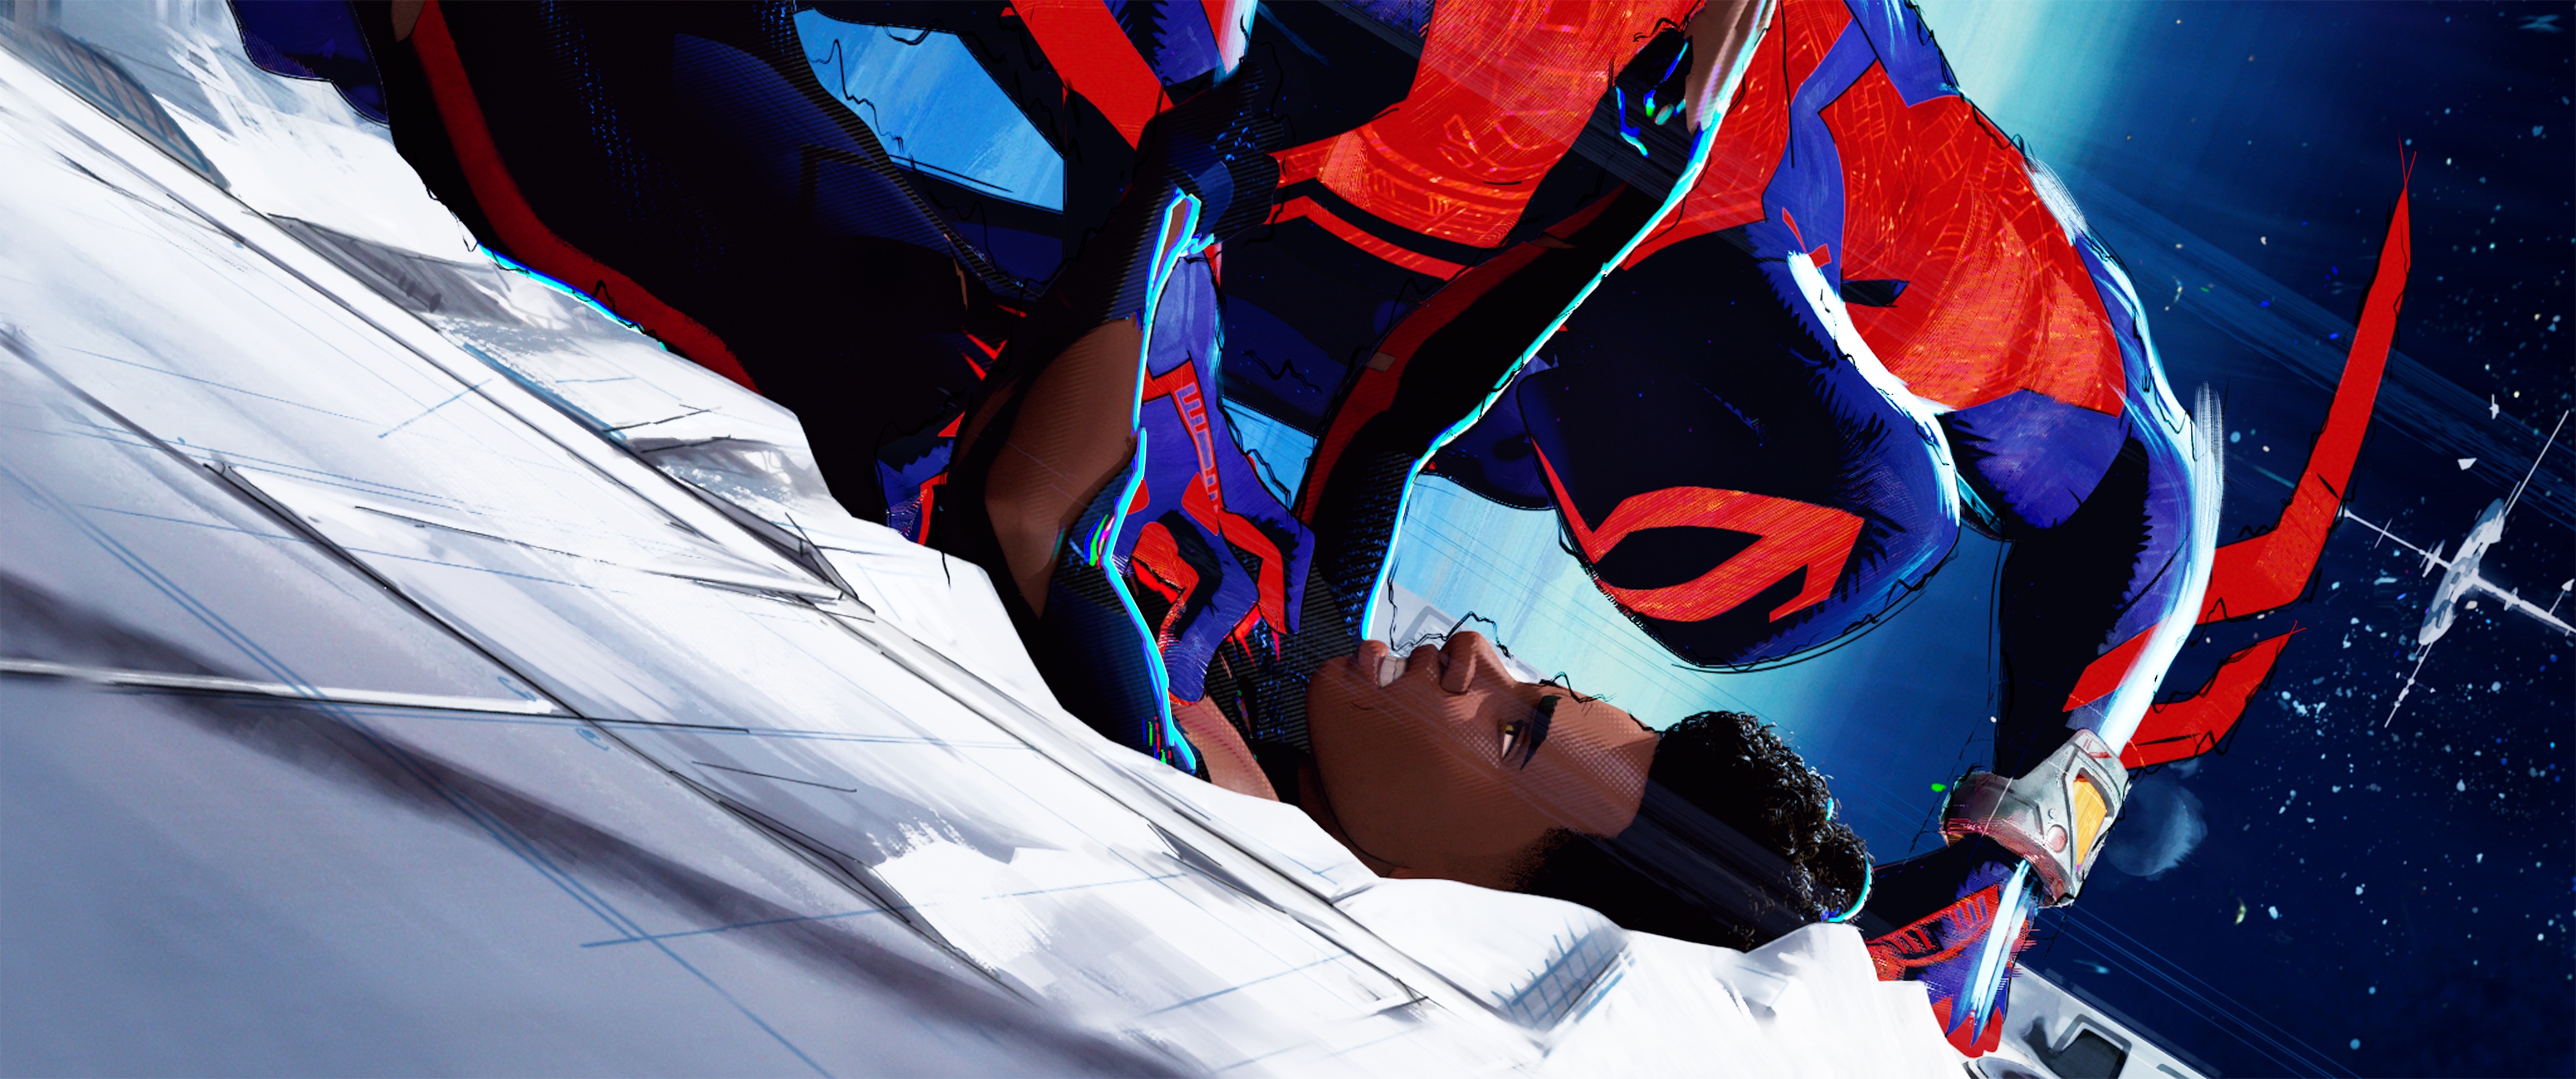 Spider-Man 2099 (Oscar Isaac) và Miles Morales (Shameik Moore) trong Spider-Man: Across the Spider-Verse